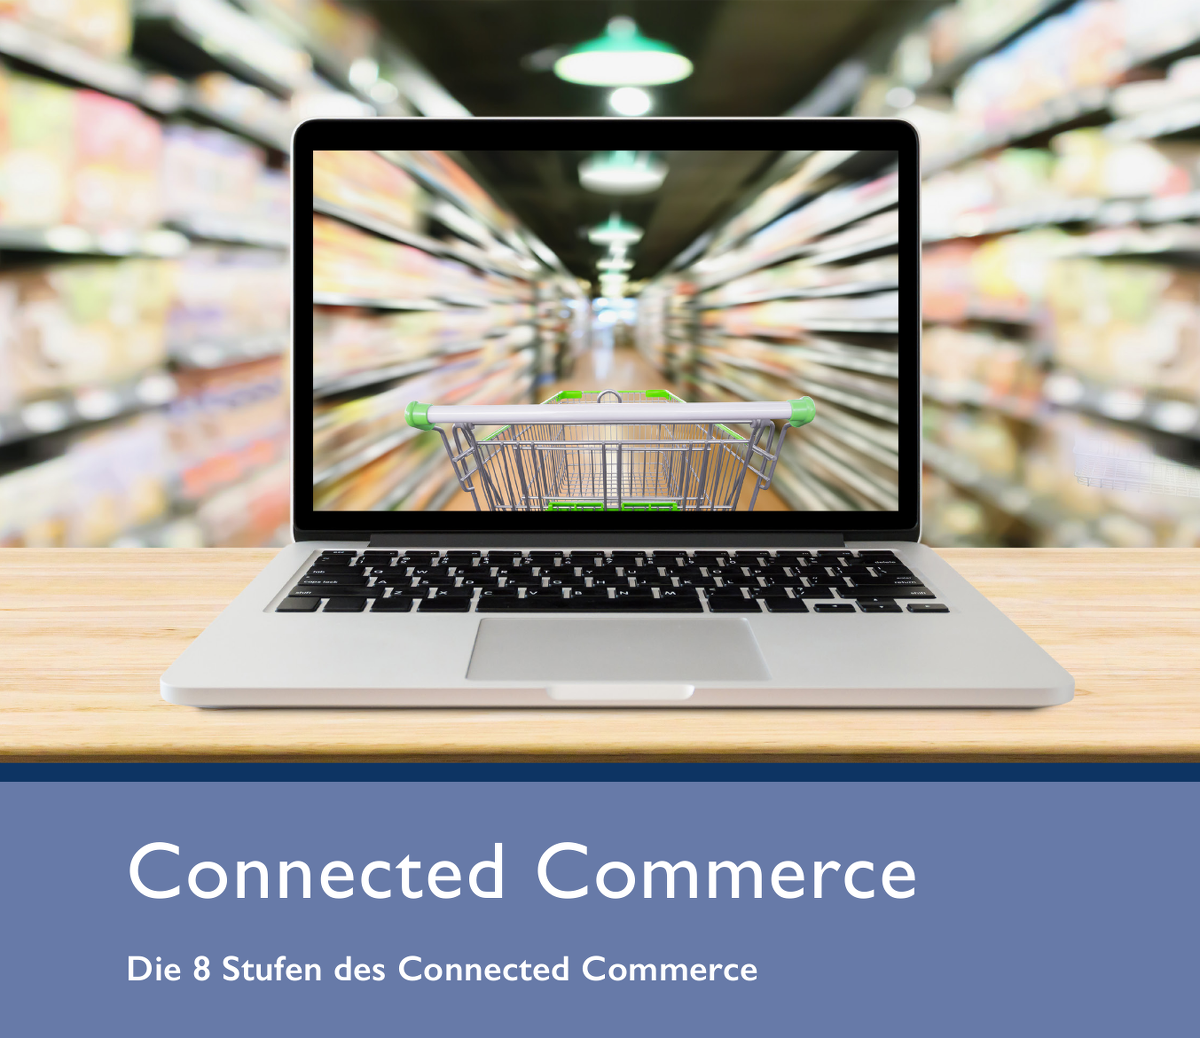 BVDW_Connected_Commerce2